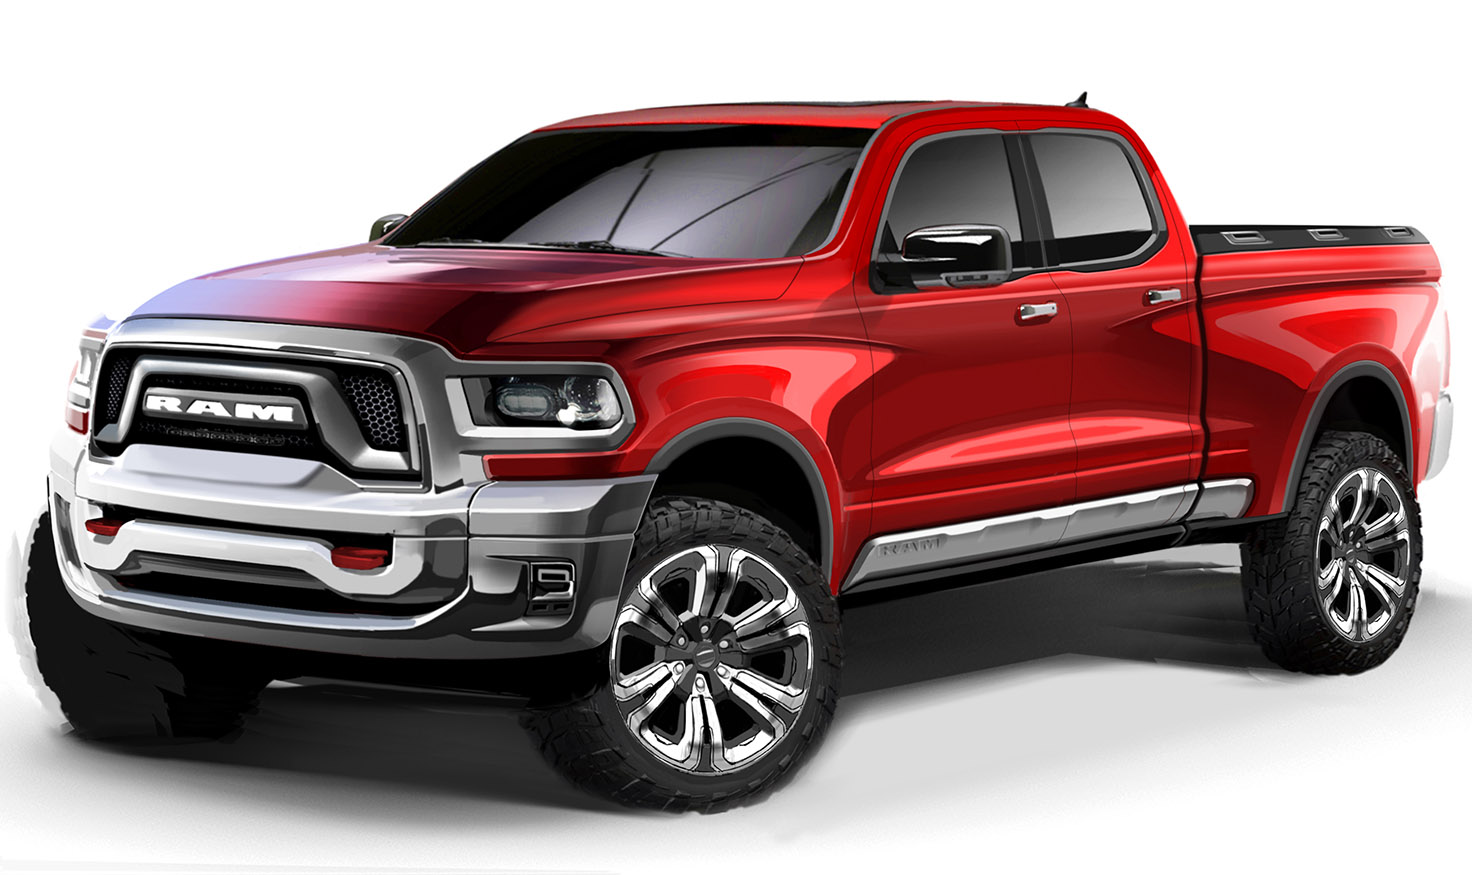 New 2021 Ram TRX May Make Its World Debut in Late June In ...